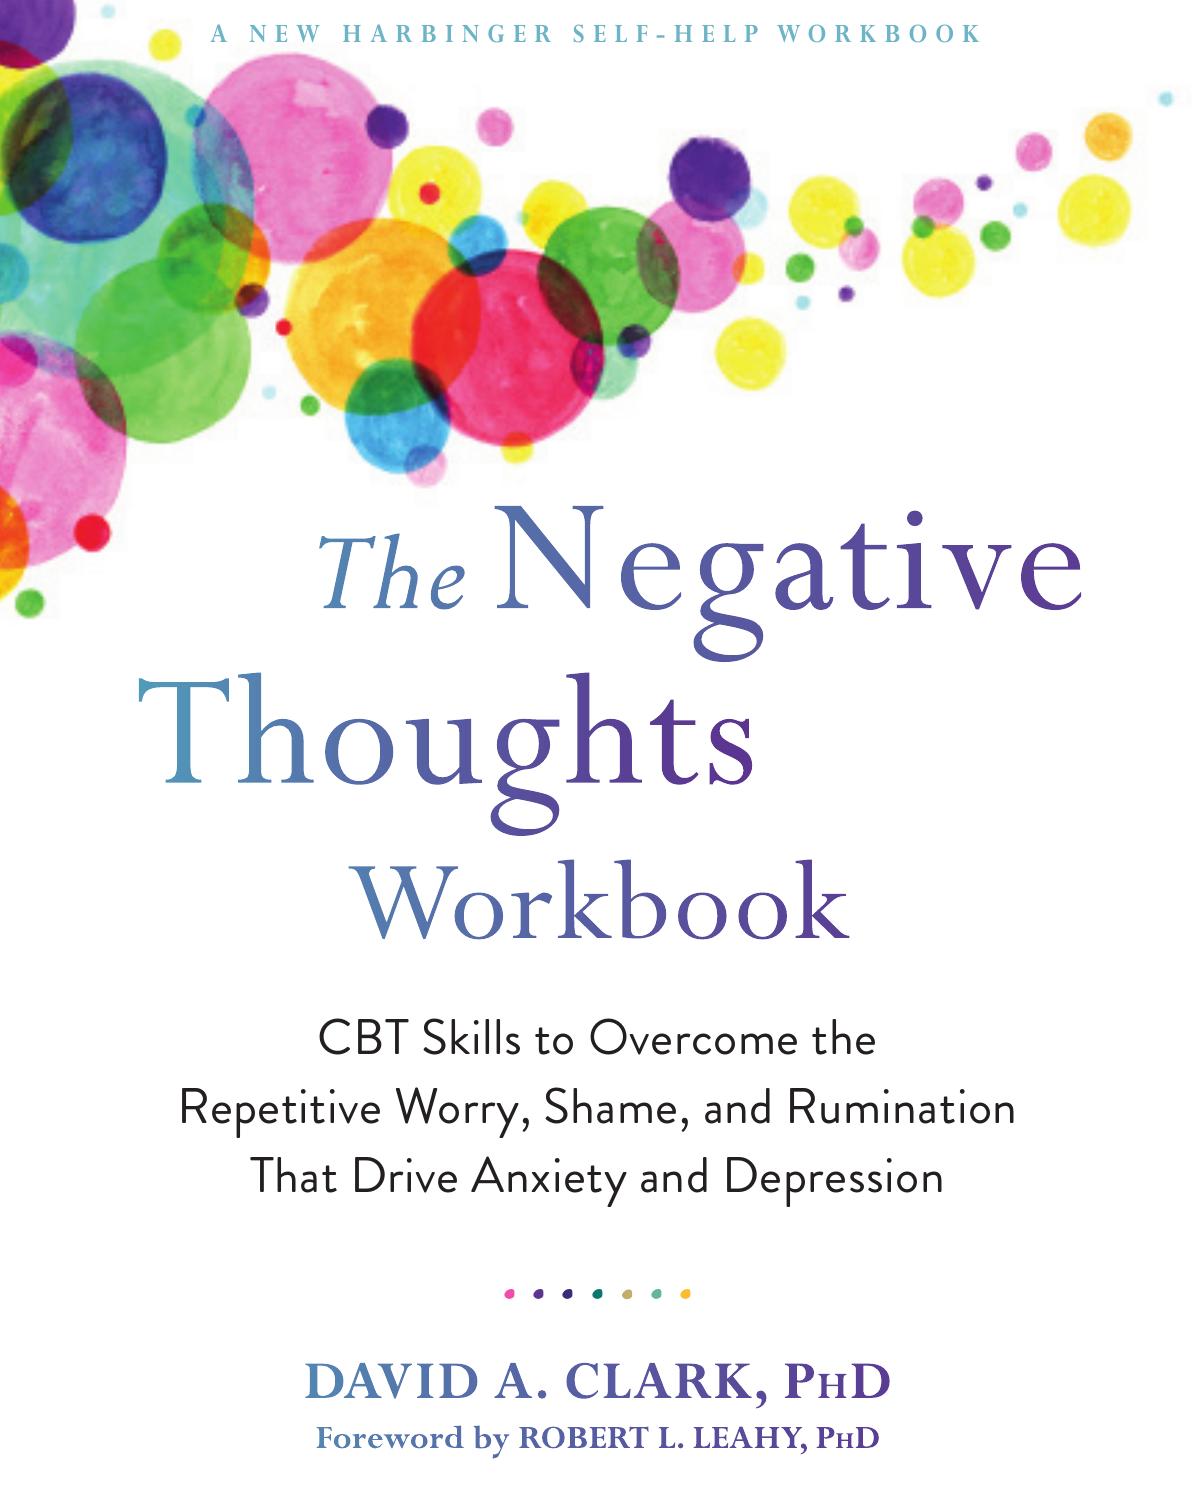 The Negative Thoughts Workbook by David A. Clark